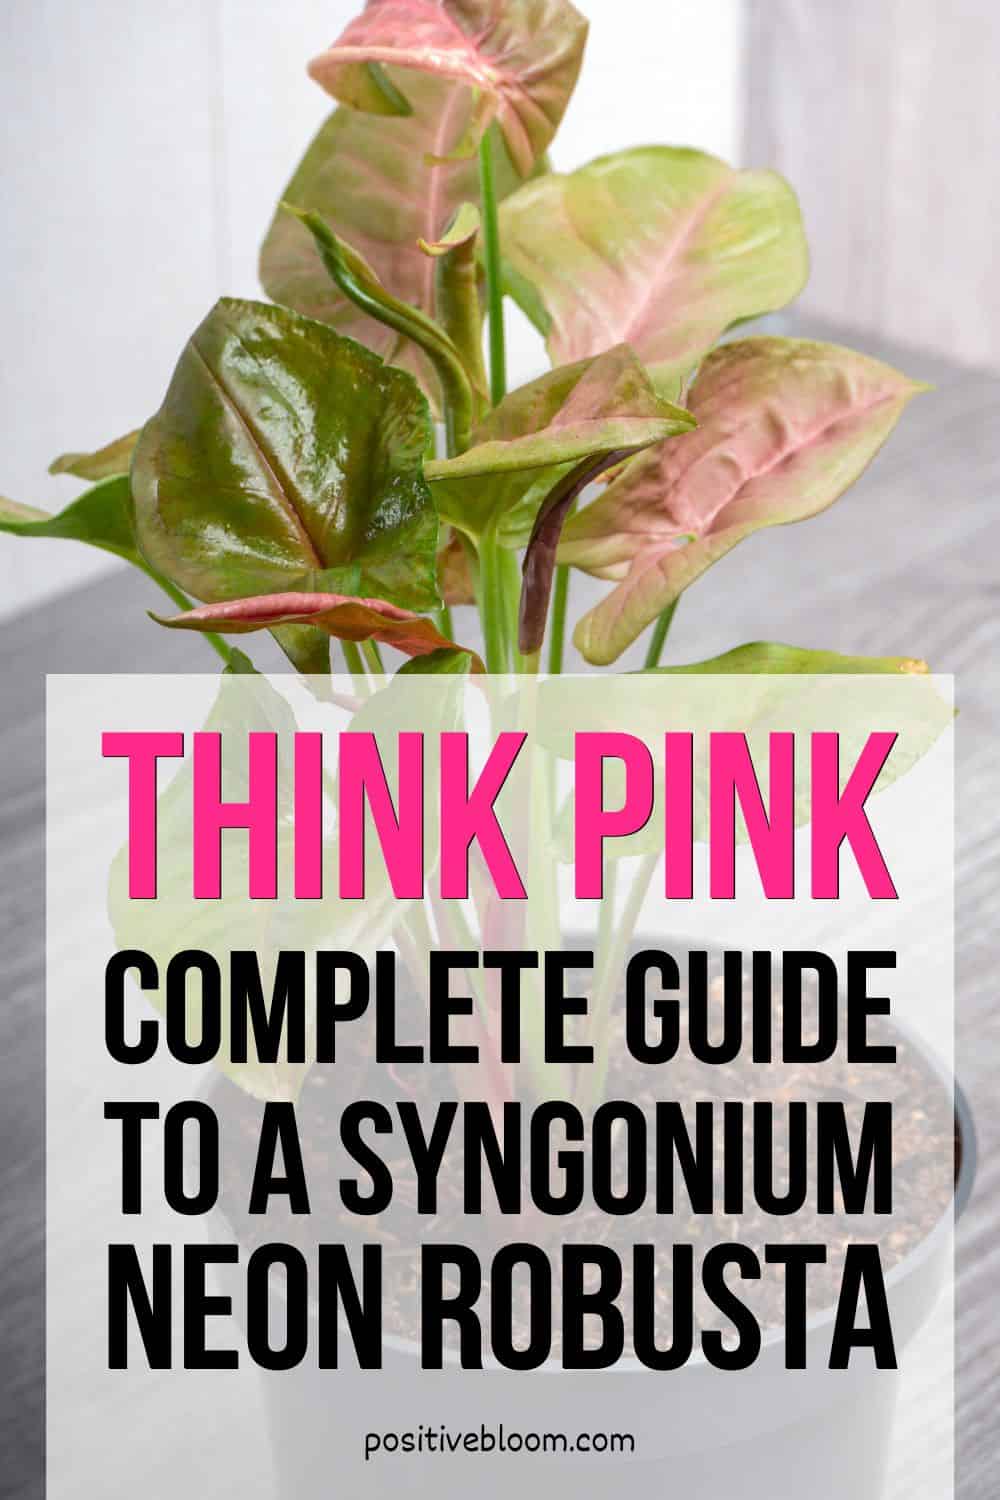 Think Pink Complete Guide To A Syngonium Neon Robusta Pinterest